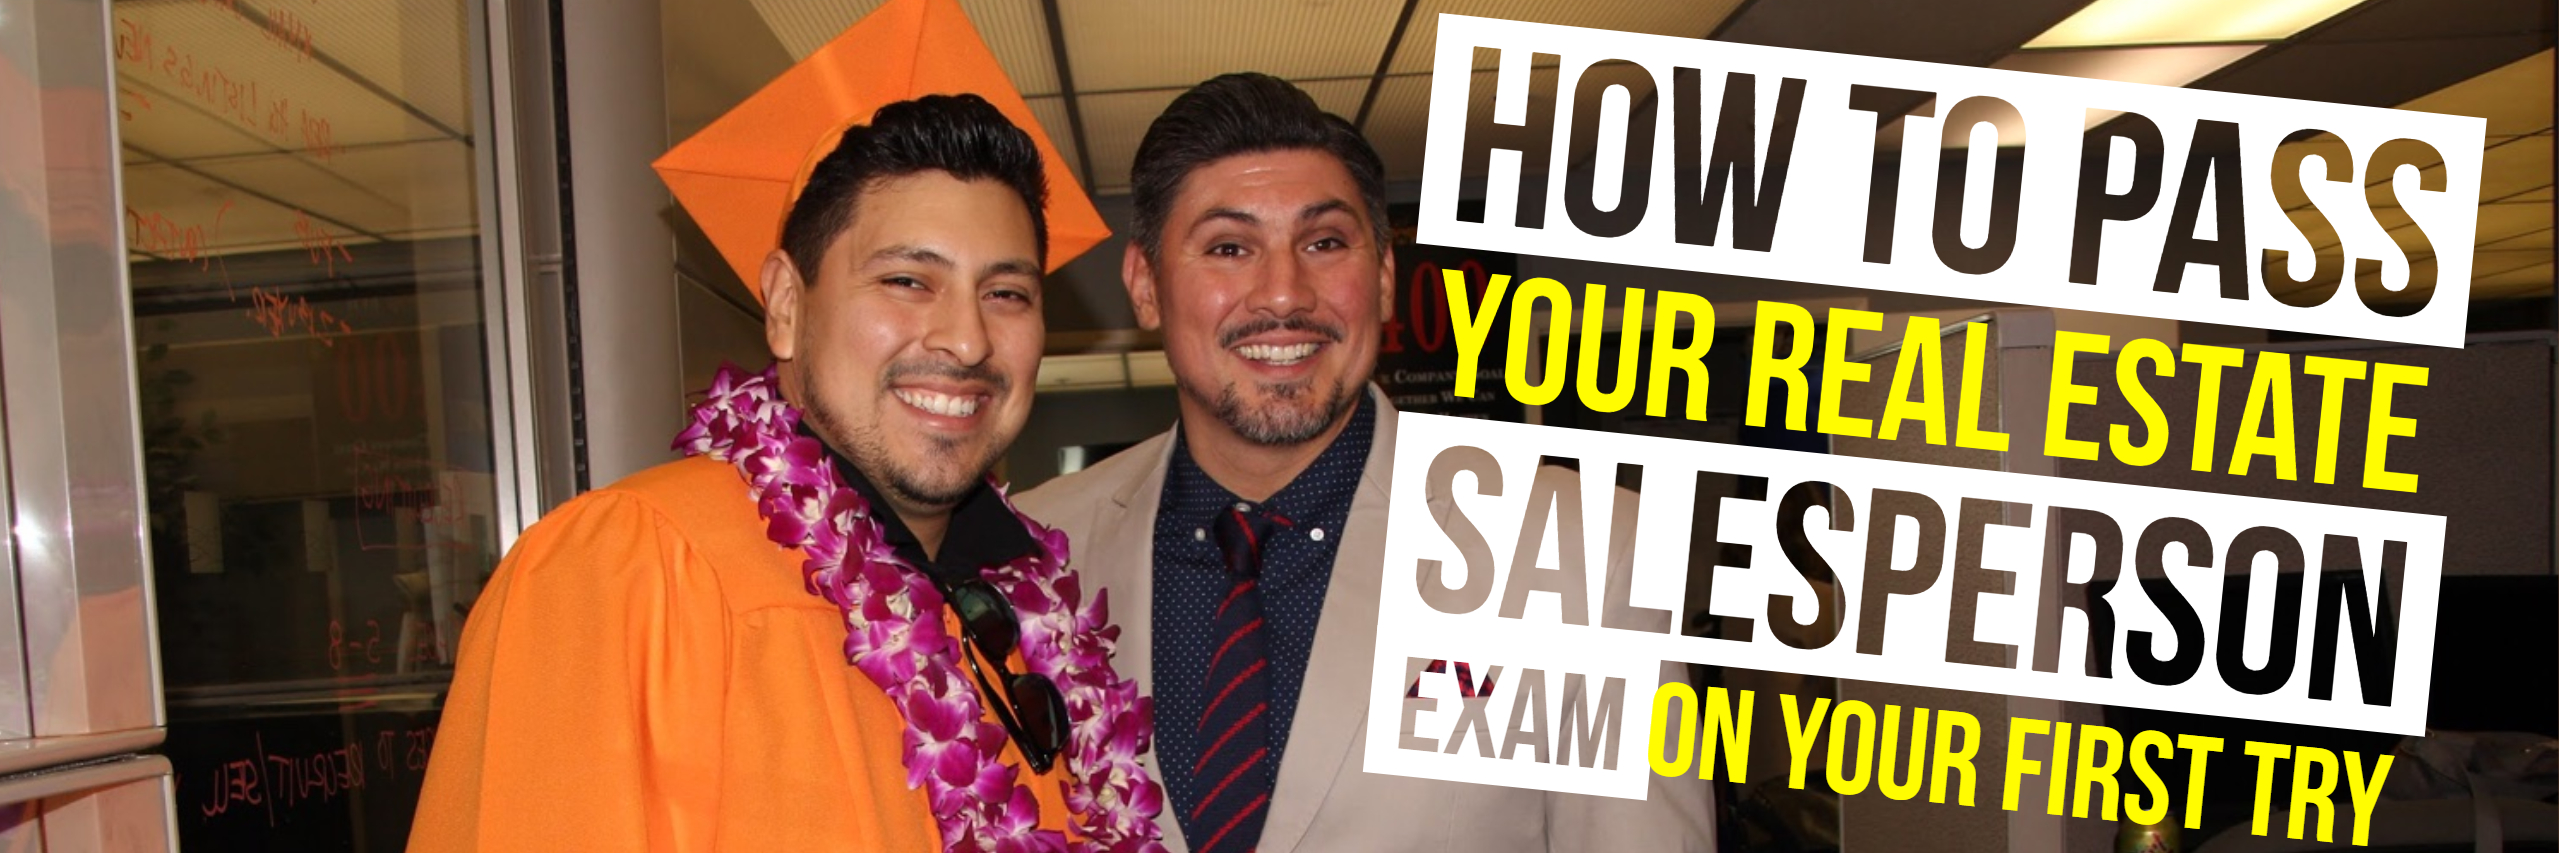 HOW TO PASS YOUR REAL ESTATE SALESPERSON EXAM ON YOUR FIRST TRY (Banner)